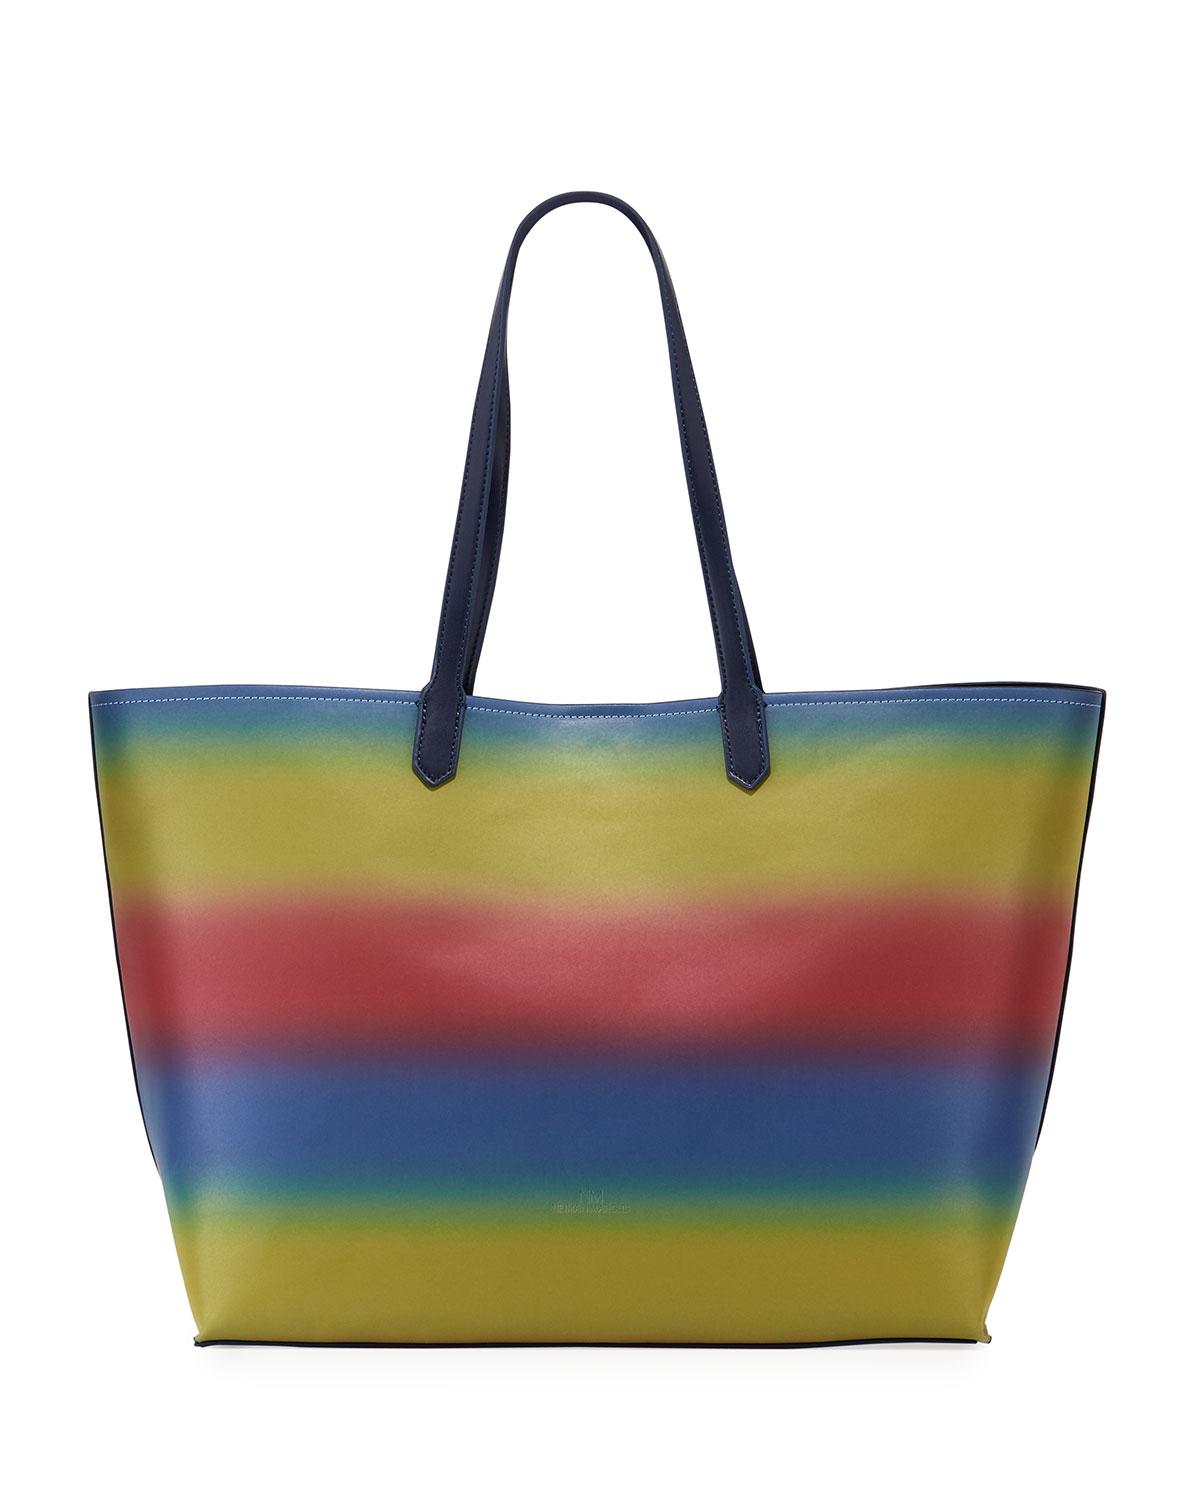 Lyst - Neiman Marcus Large Reflective Rainbow Tote Bag in Blue